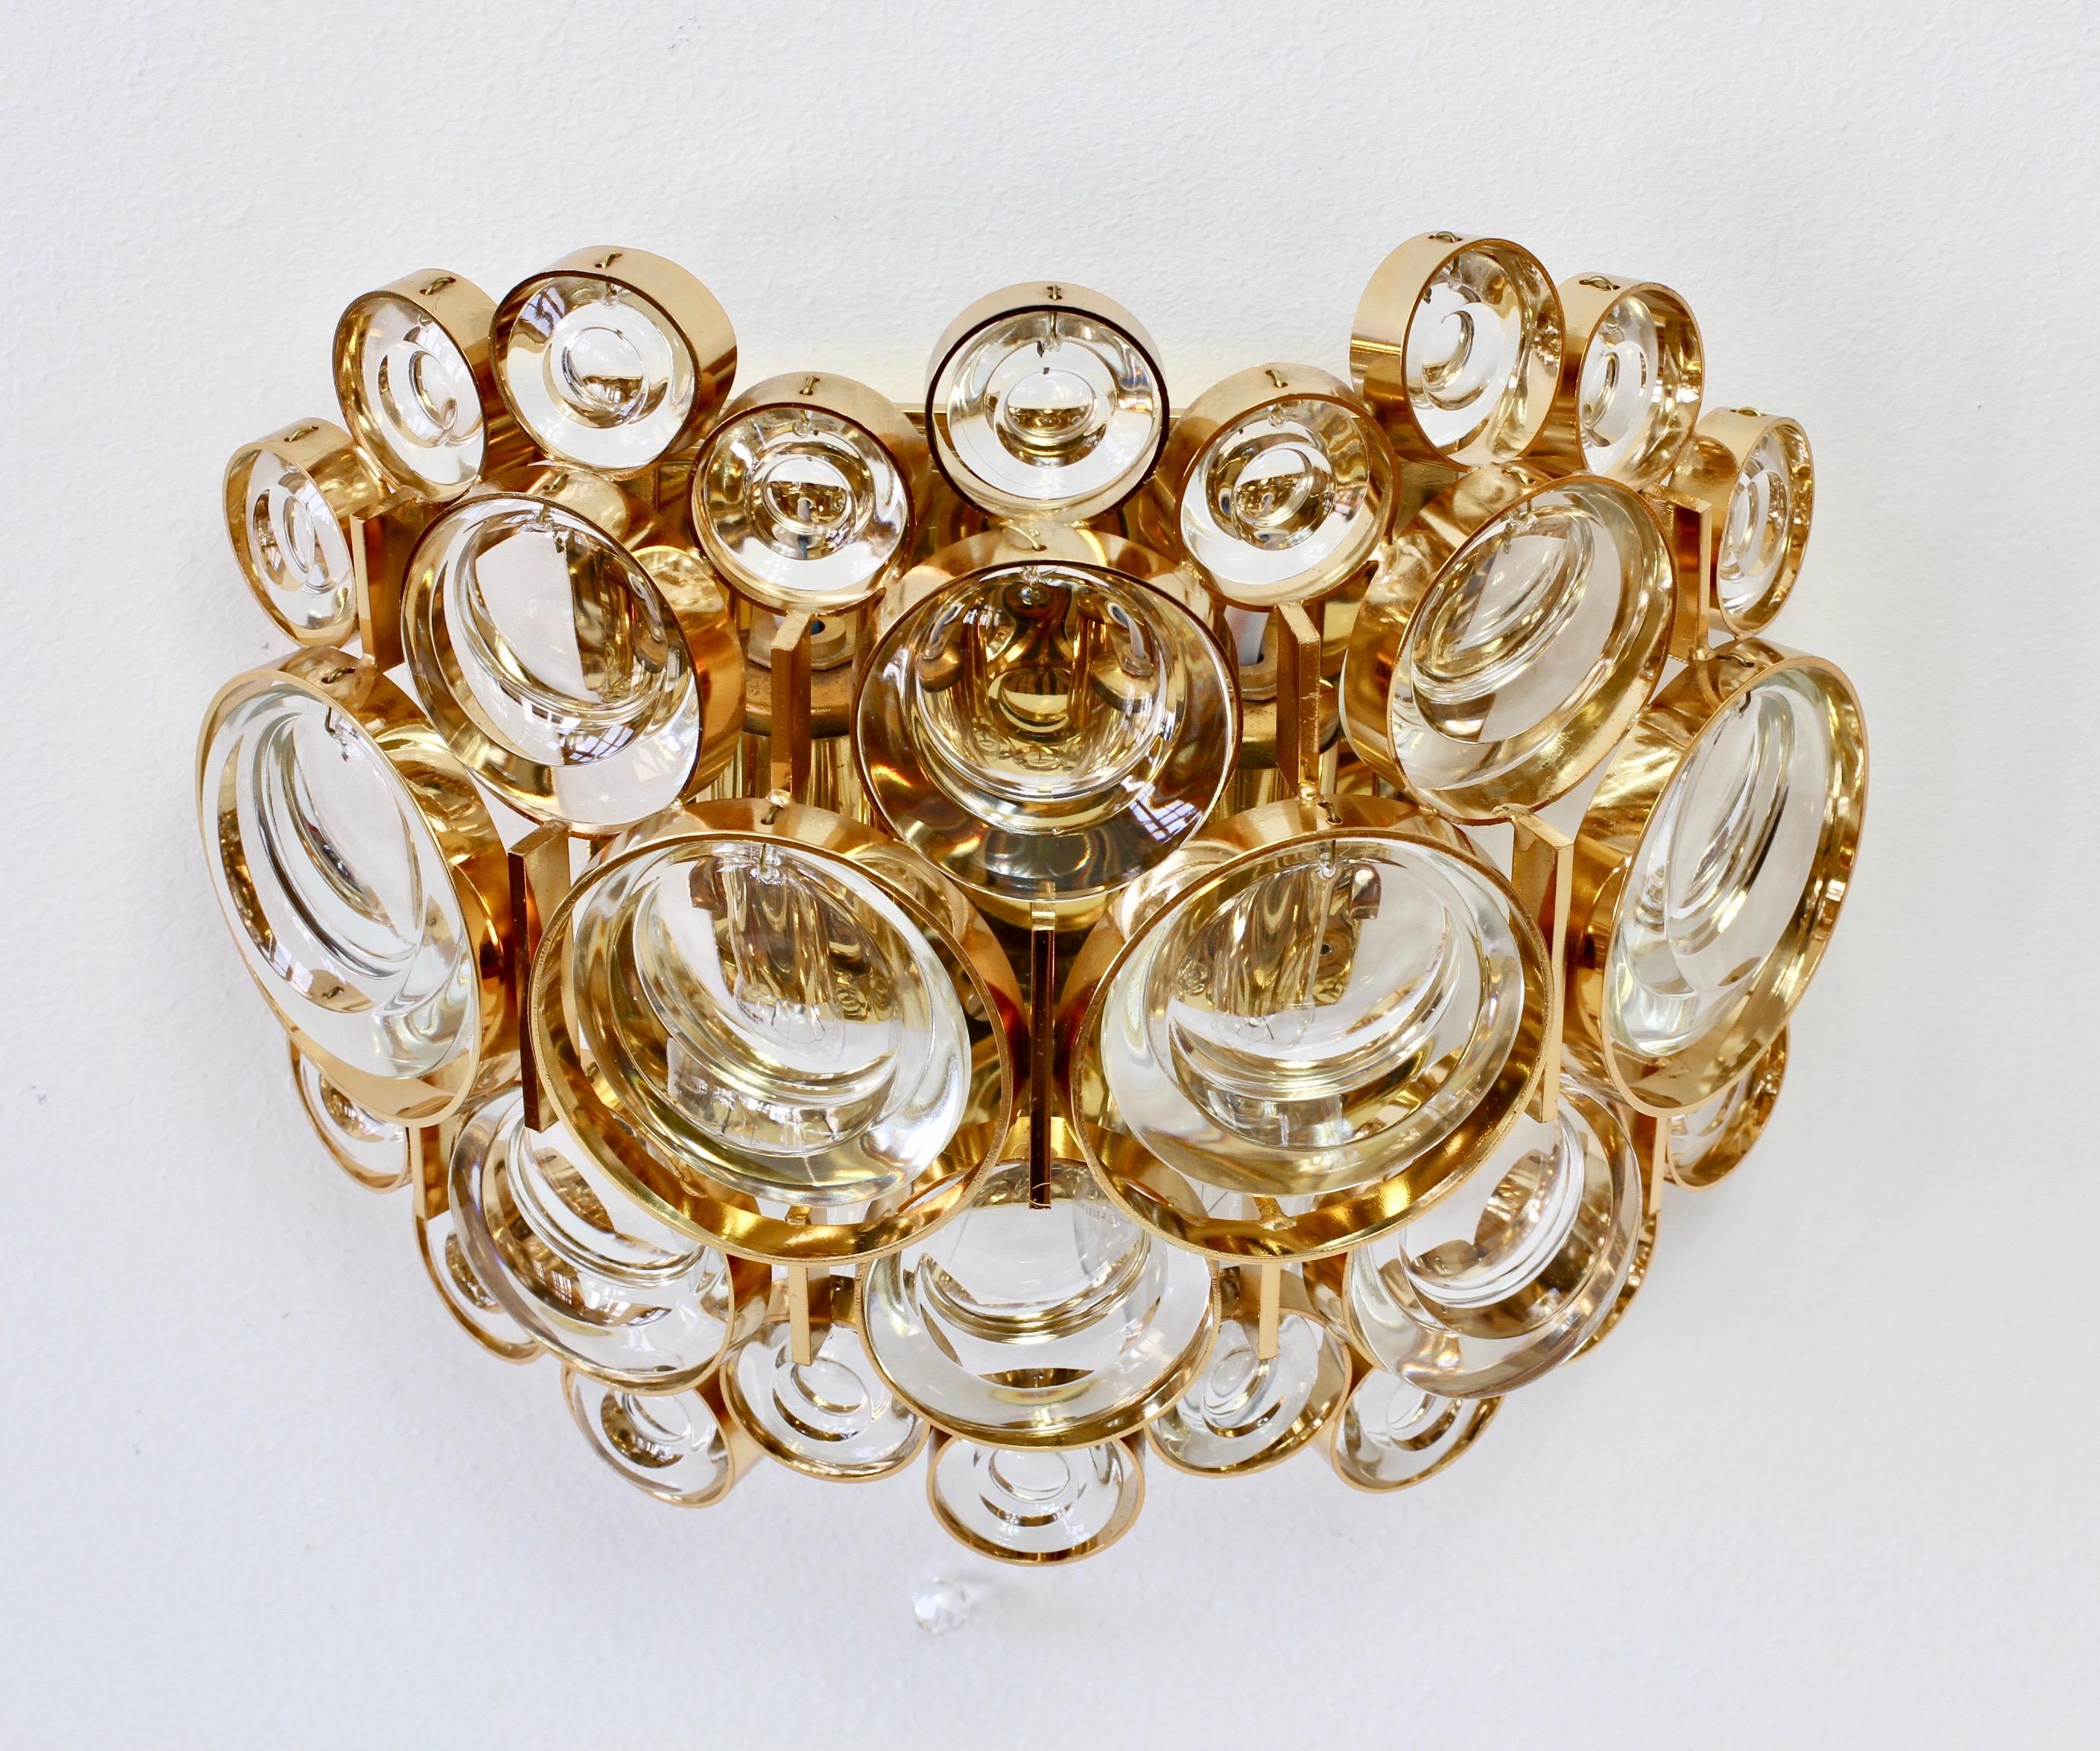 Stunning Pair of German Mid-Century Crystal Glass Wall Lights / Sconces by Palwa 4